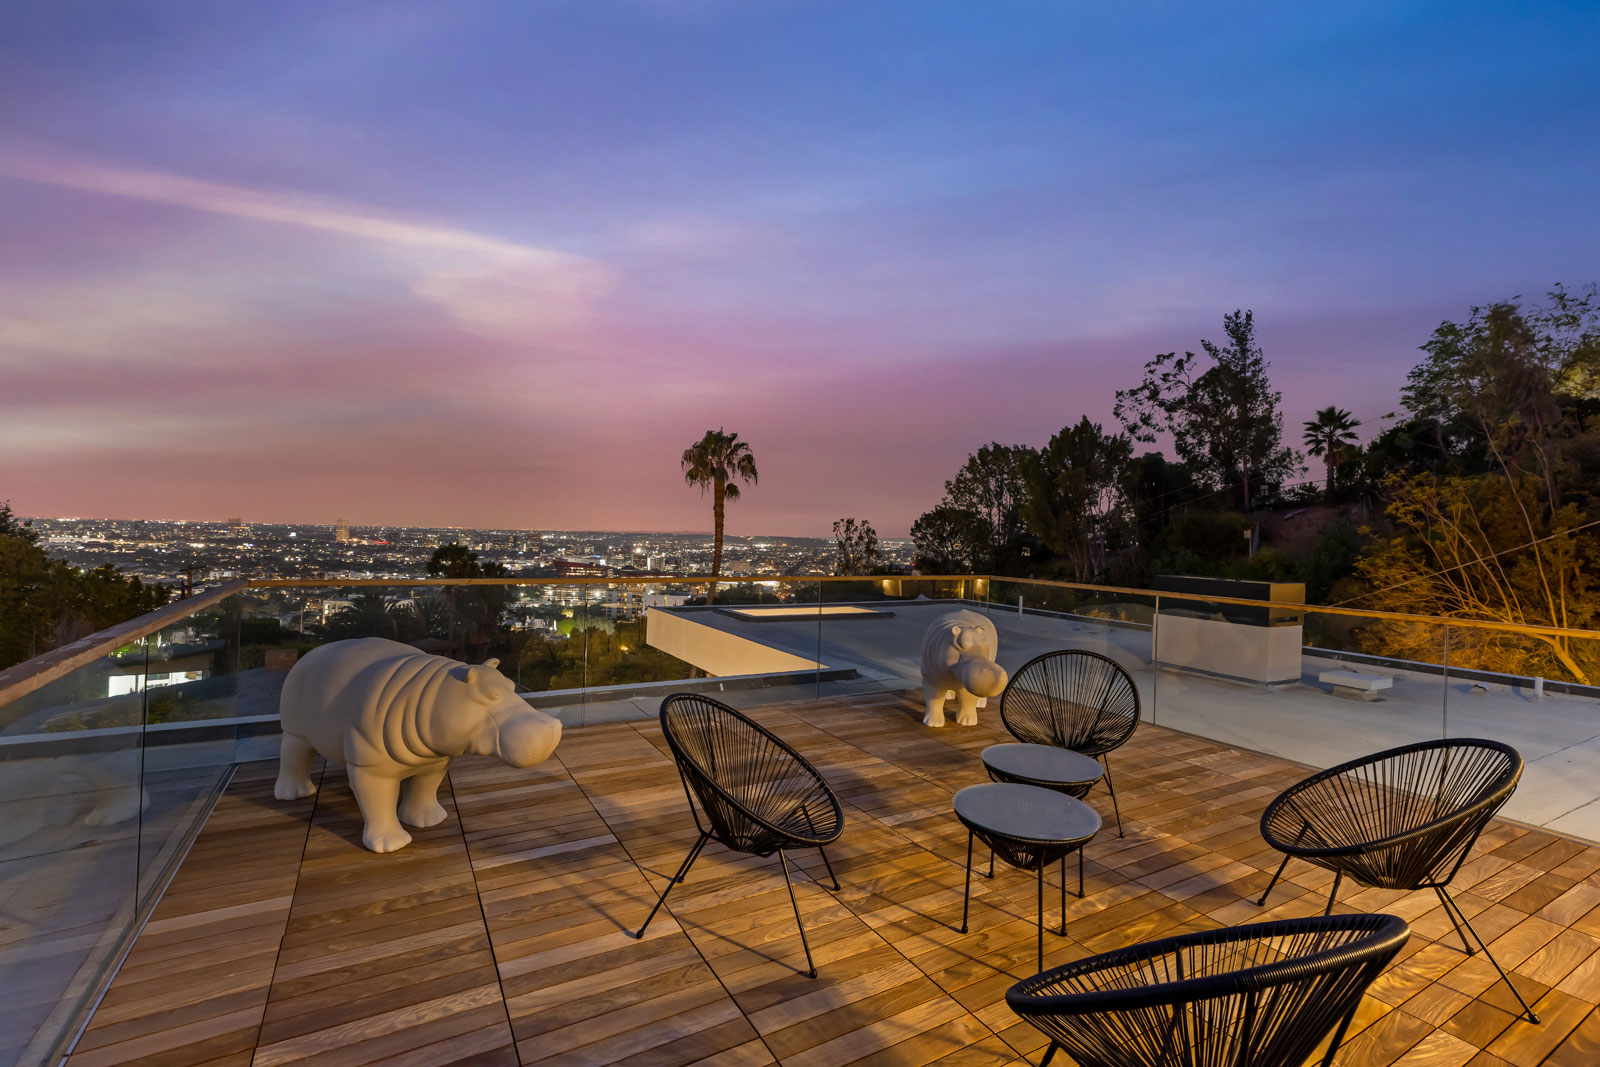 The Los Angeles Basin at night from the roof deck. Photo: © Anthony Barcelo, Barcelo Photography